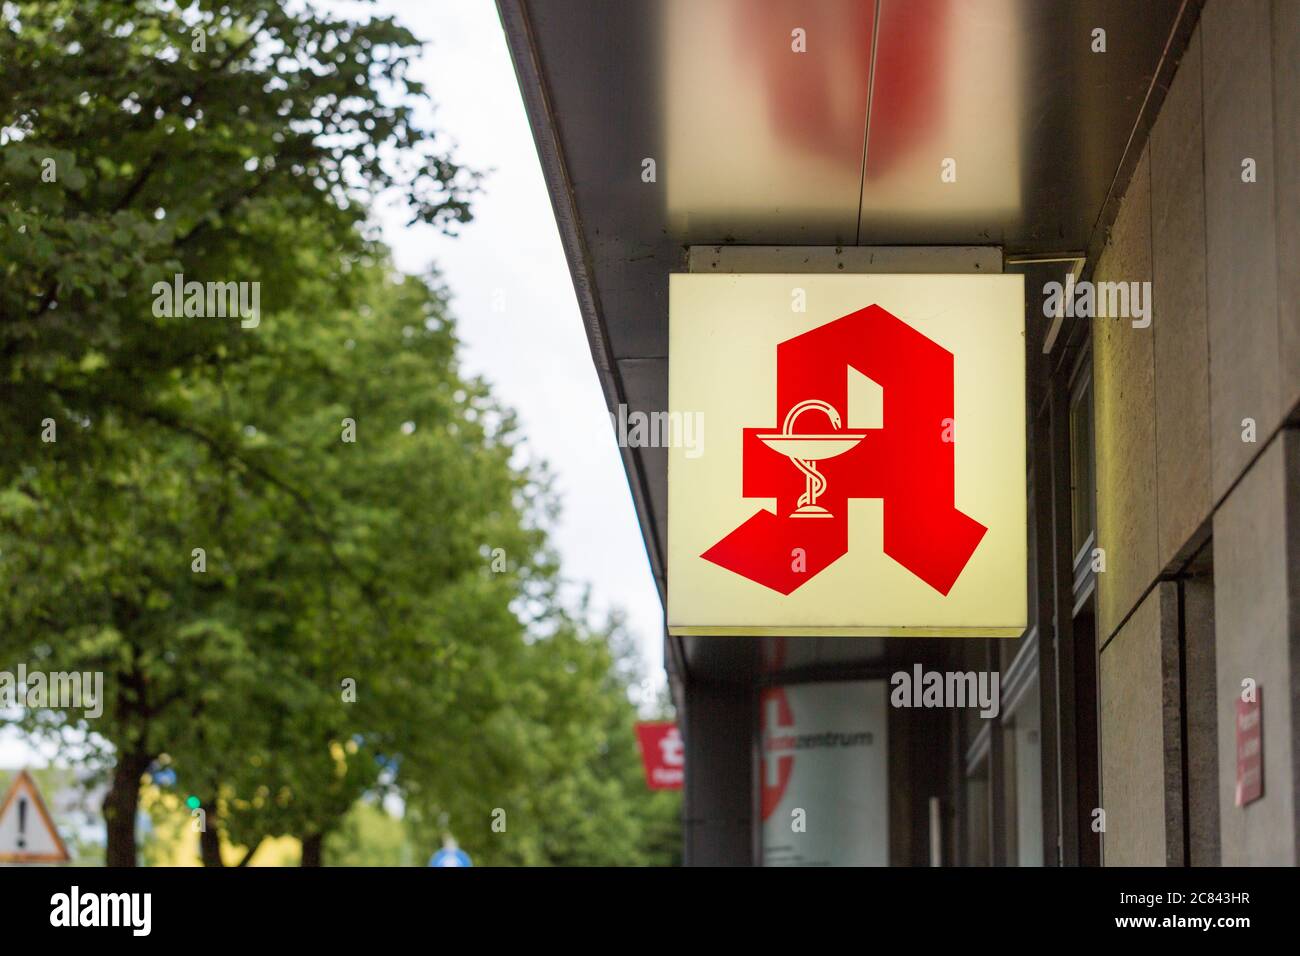 Munich, Bavaria / Germany - July 6, 2020: Illuminated pharmacy sign. Typical logo of a german 'Apotheke': A big red 'A' and the symbol of snake and ca Stock Photo